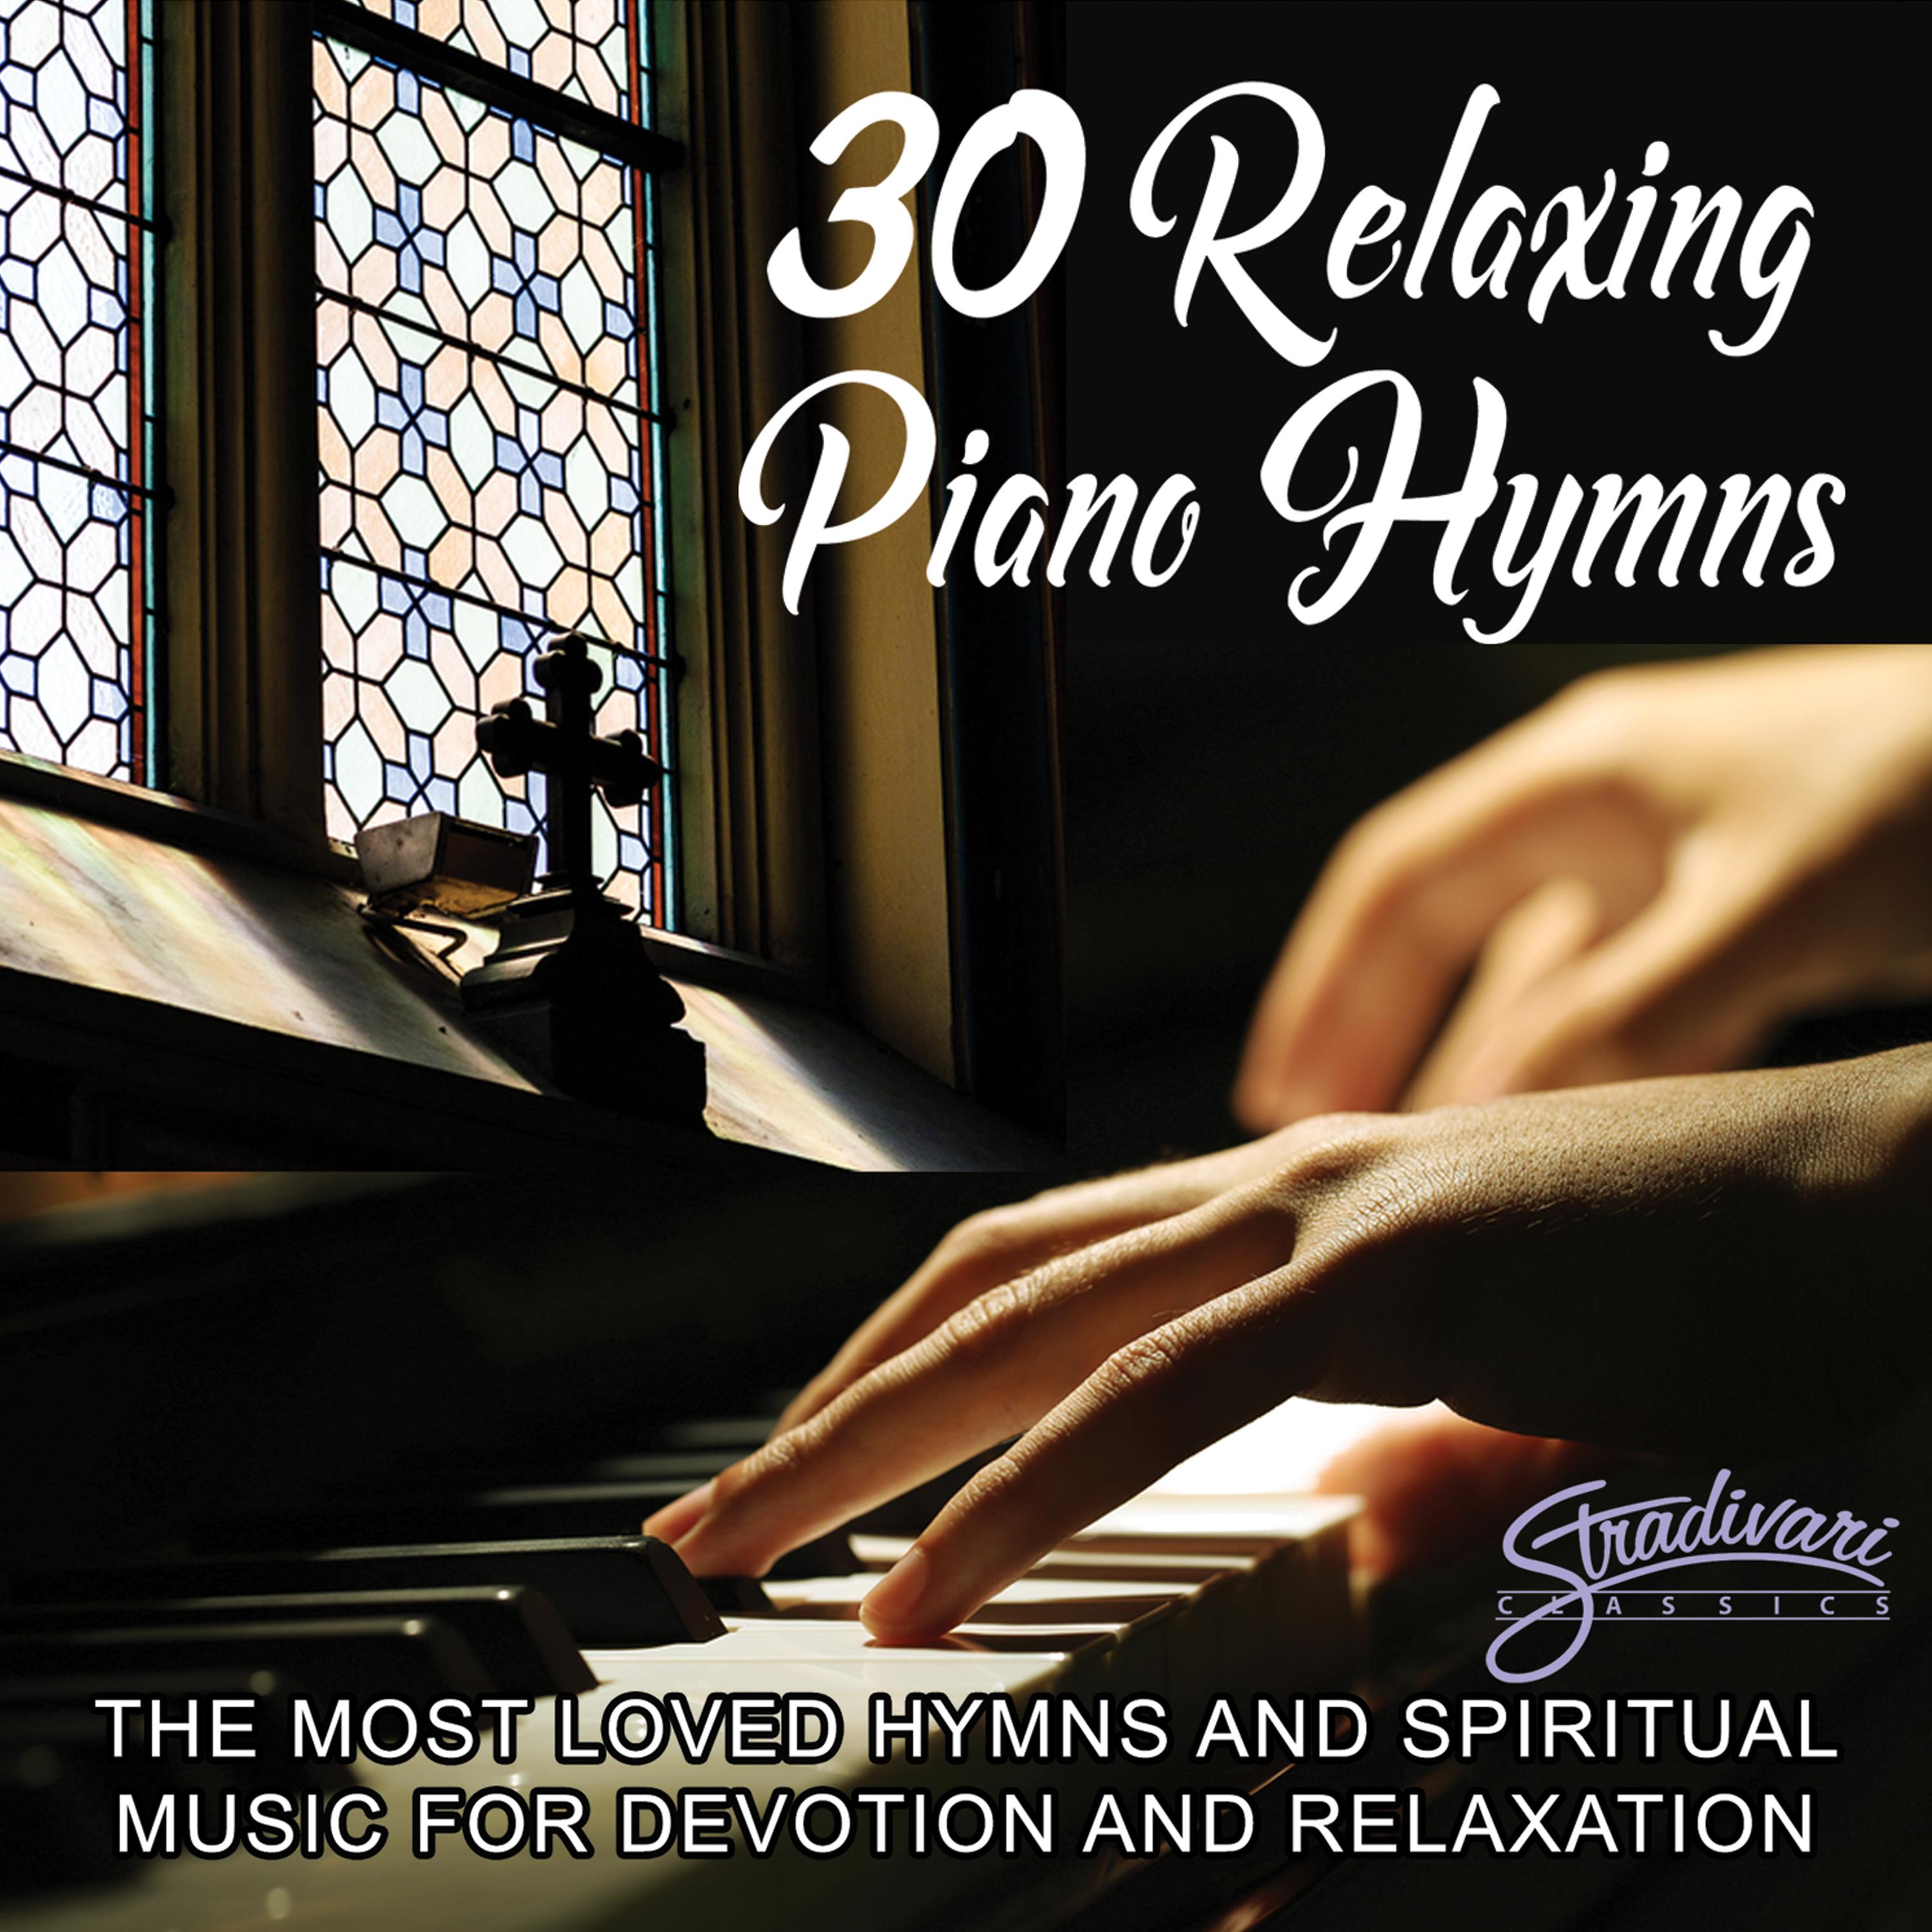 30 Relaxing Piano Hymns - The Most Loved